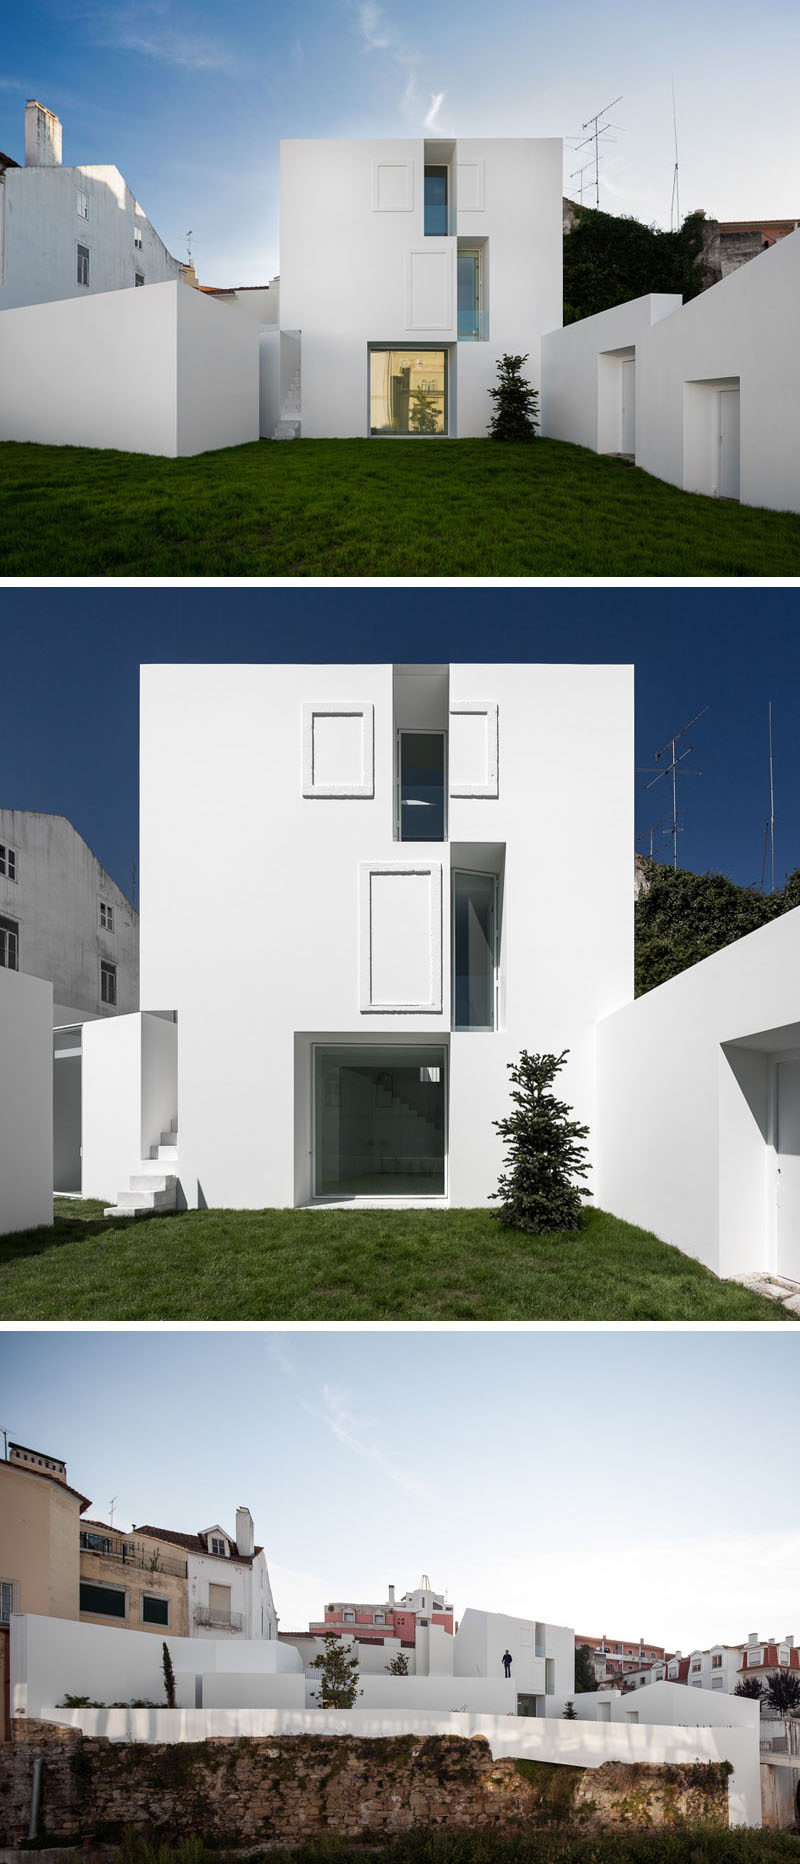 House Exterior Colors - 11 Modern White Houses From Around The World // The bright white exterior of this angular home gives it a clean look and sets it apart from the other houses around it.